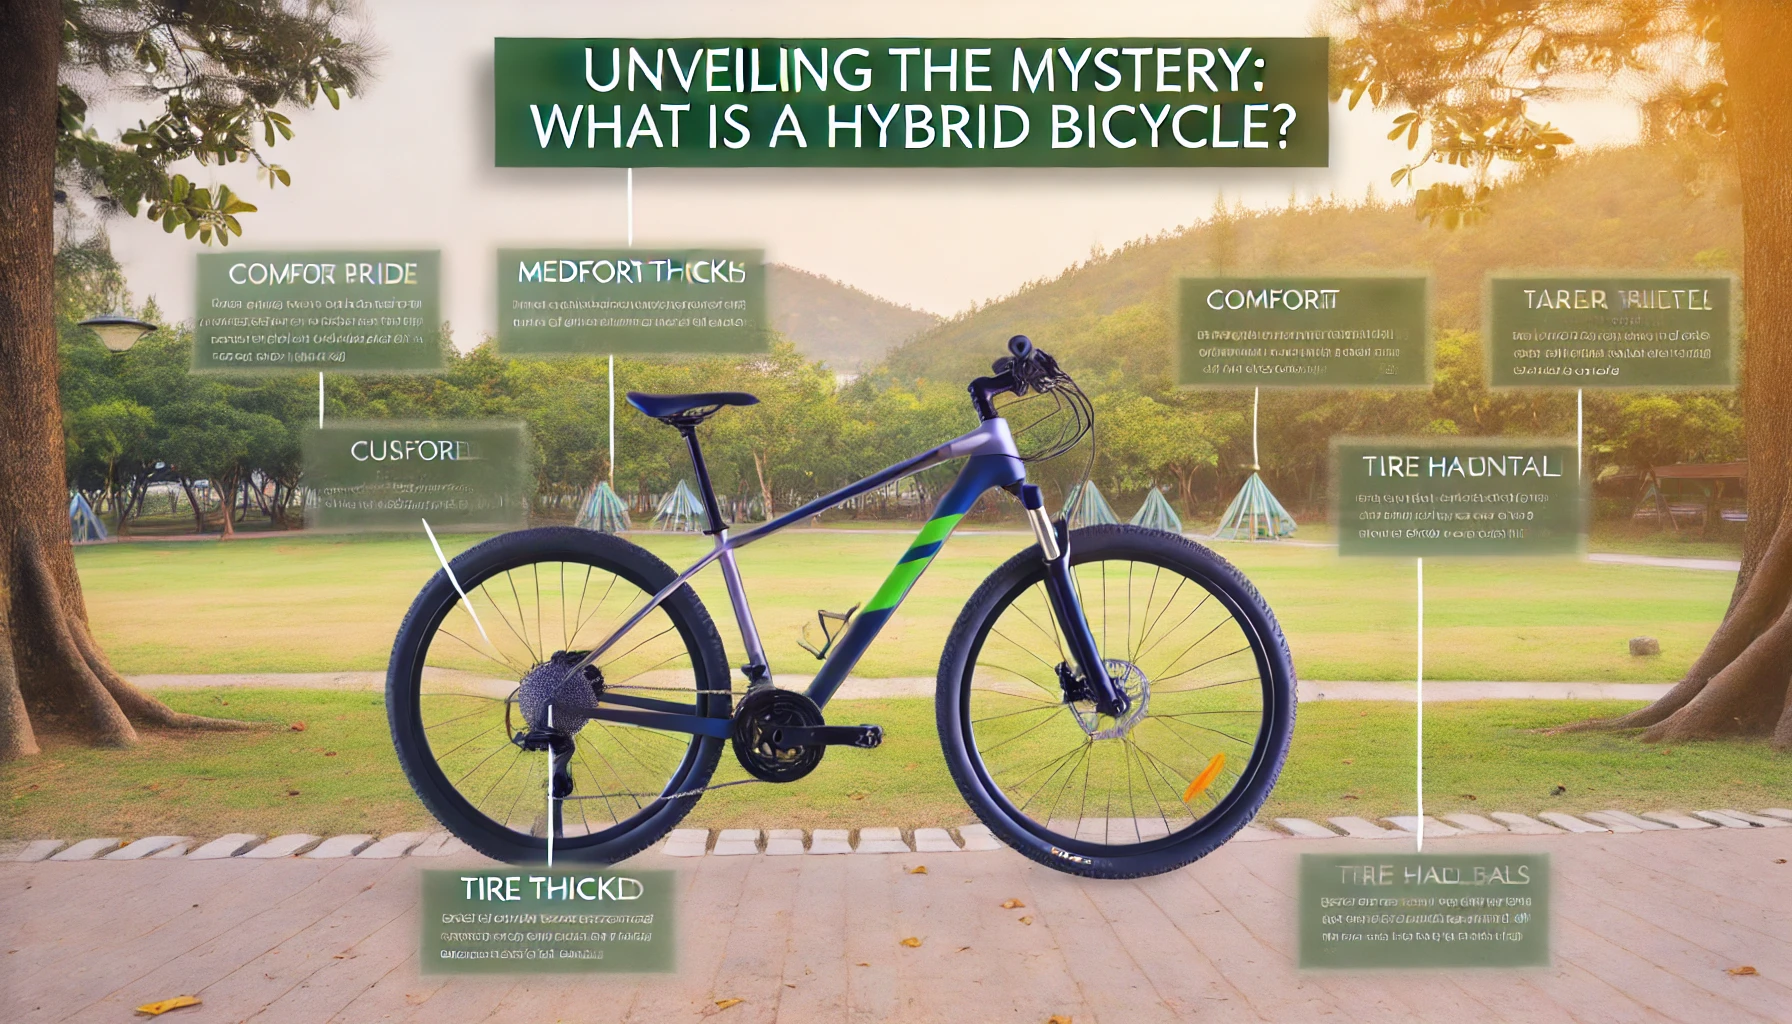 Unveiling the Mystery: What is a Hybrid Bicycle?